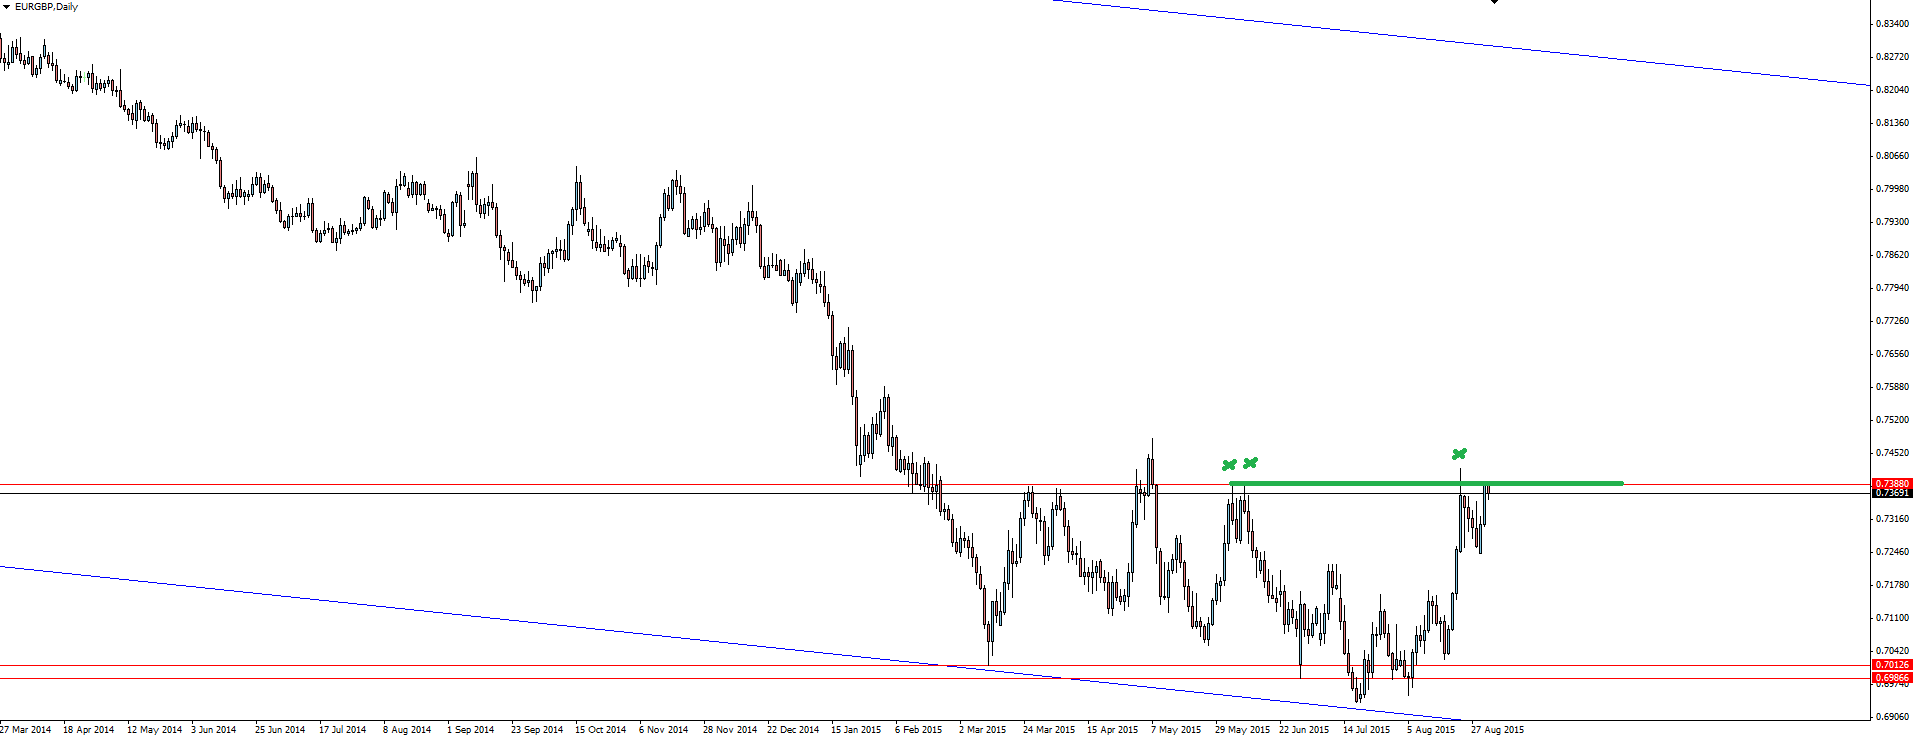 EUR/GBP Daily